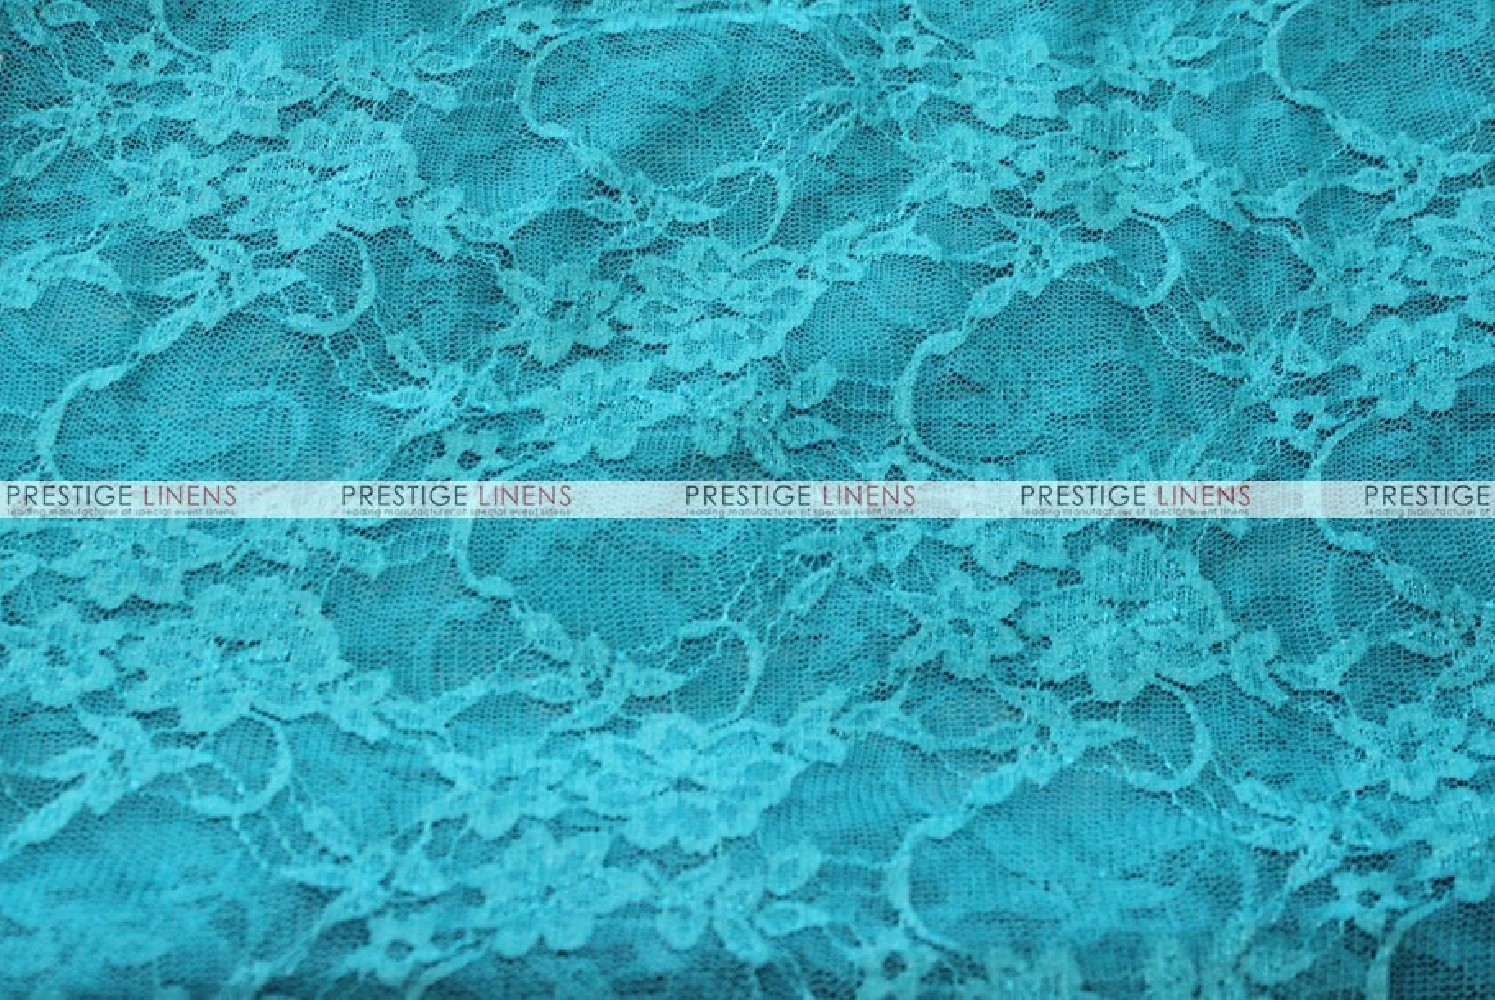 Victorian Stretch Lace - Fabric by the yard - Teal - Prestige Linens